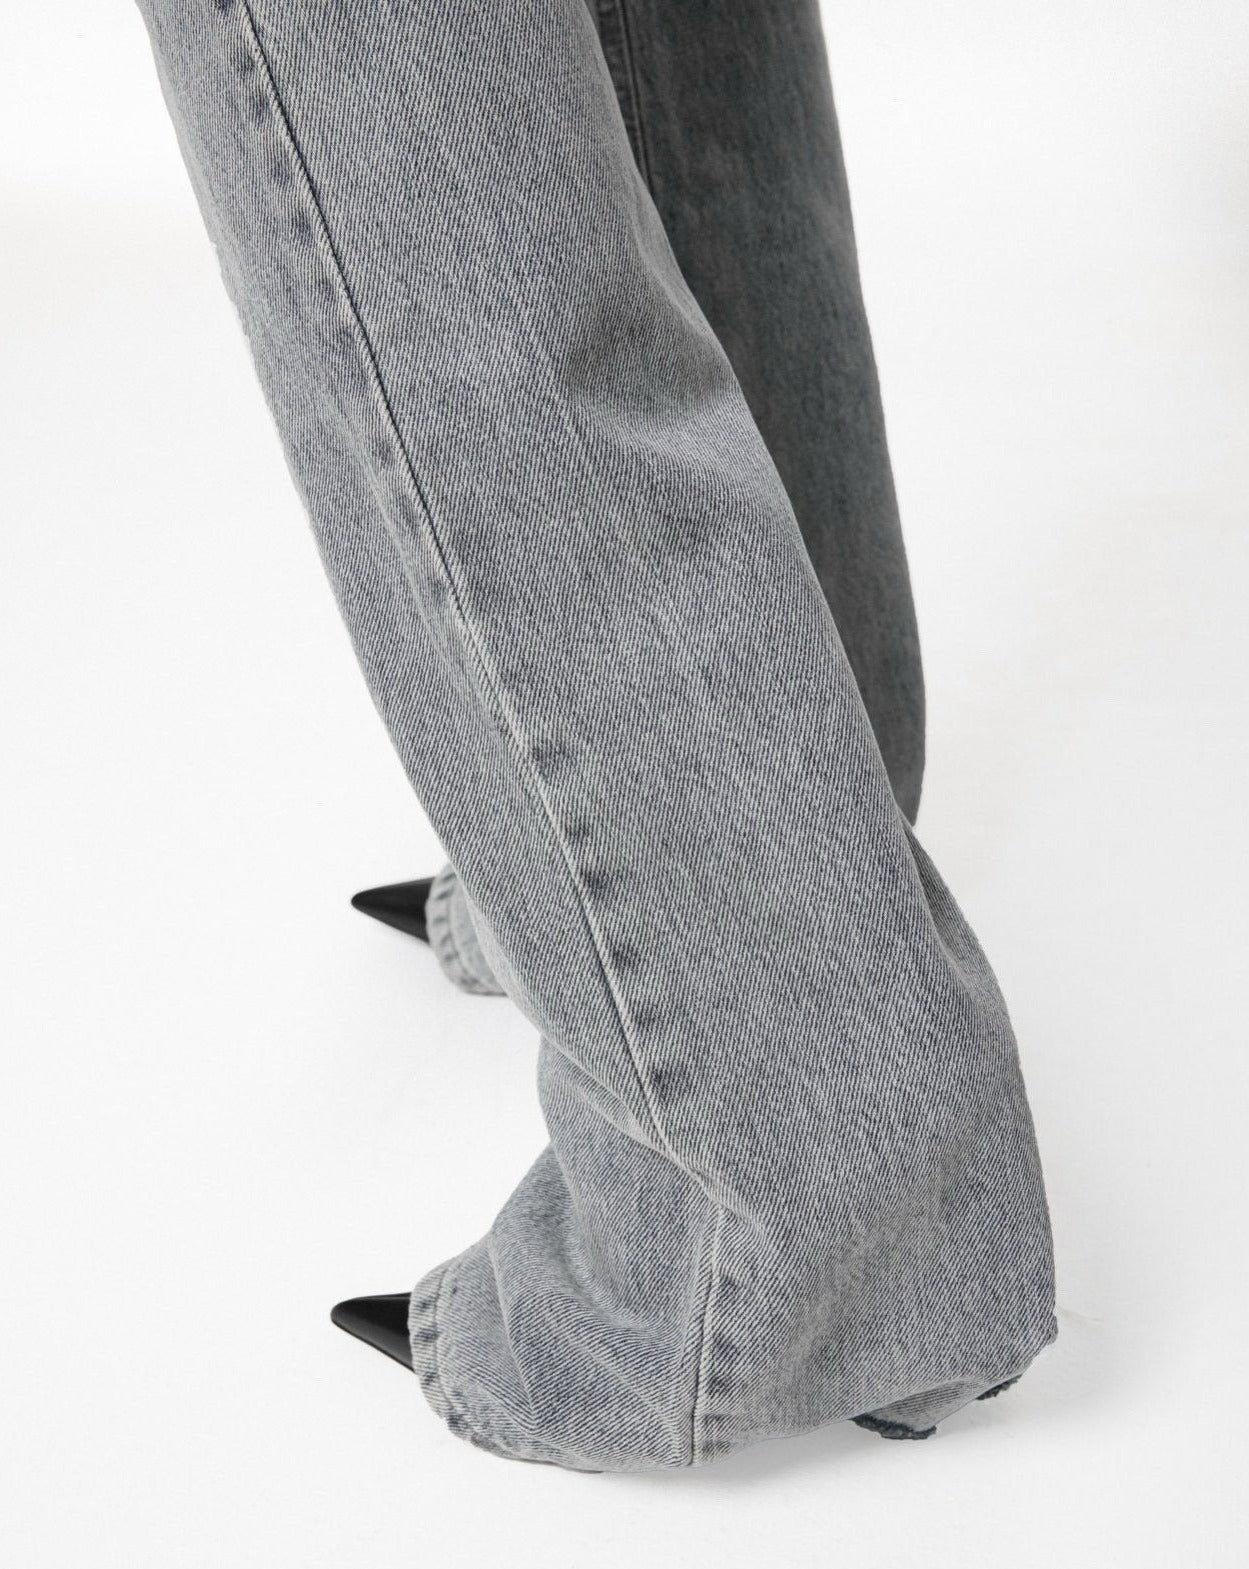 【PAPERMOON ペーパームーン】SS / Straight Boots Cut X - Ray Jeans